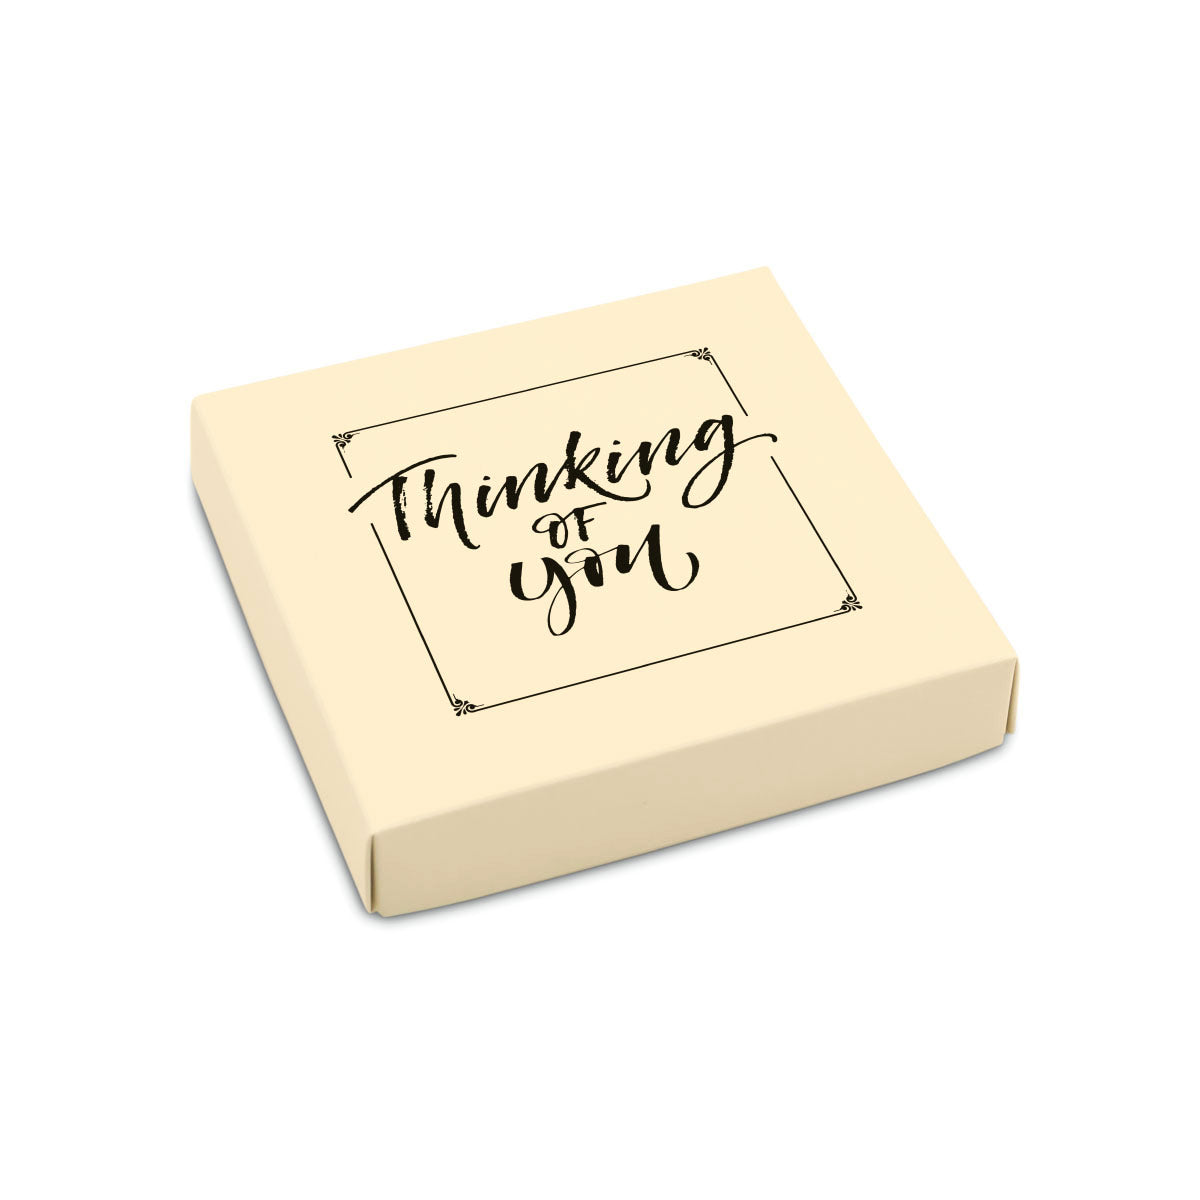 Thinking of You Themed Box Cover for 9 Piece Holiday Assortment